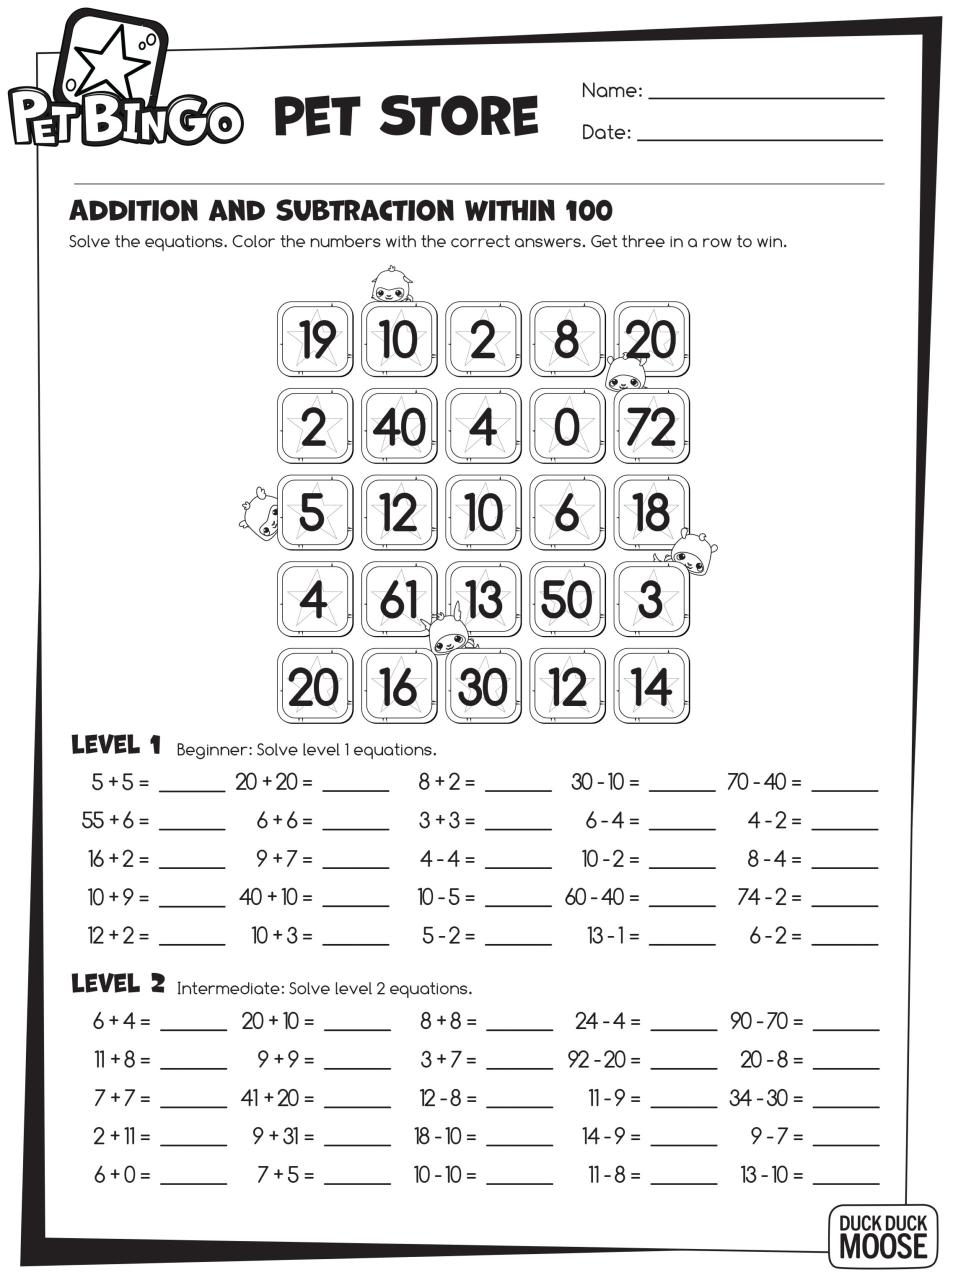 Printable Multiplication And Division Games